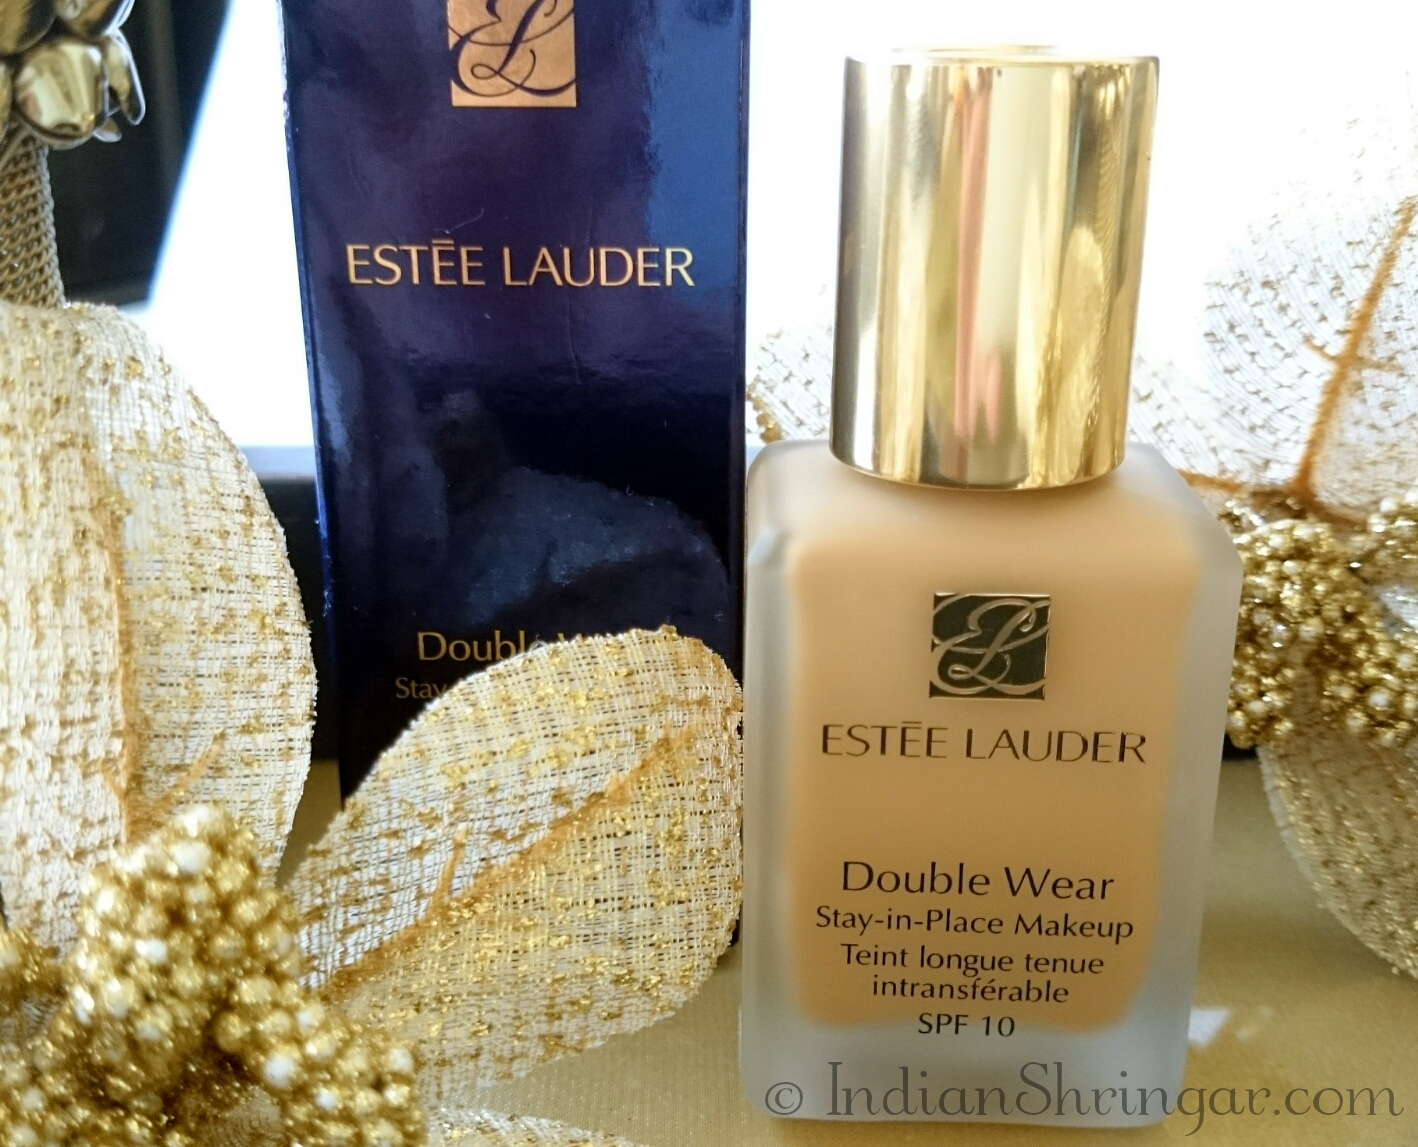 Estee Lauder Double Wear Foundation review, swatch and price in India